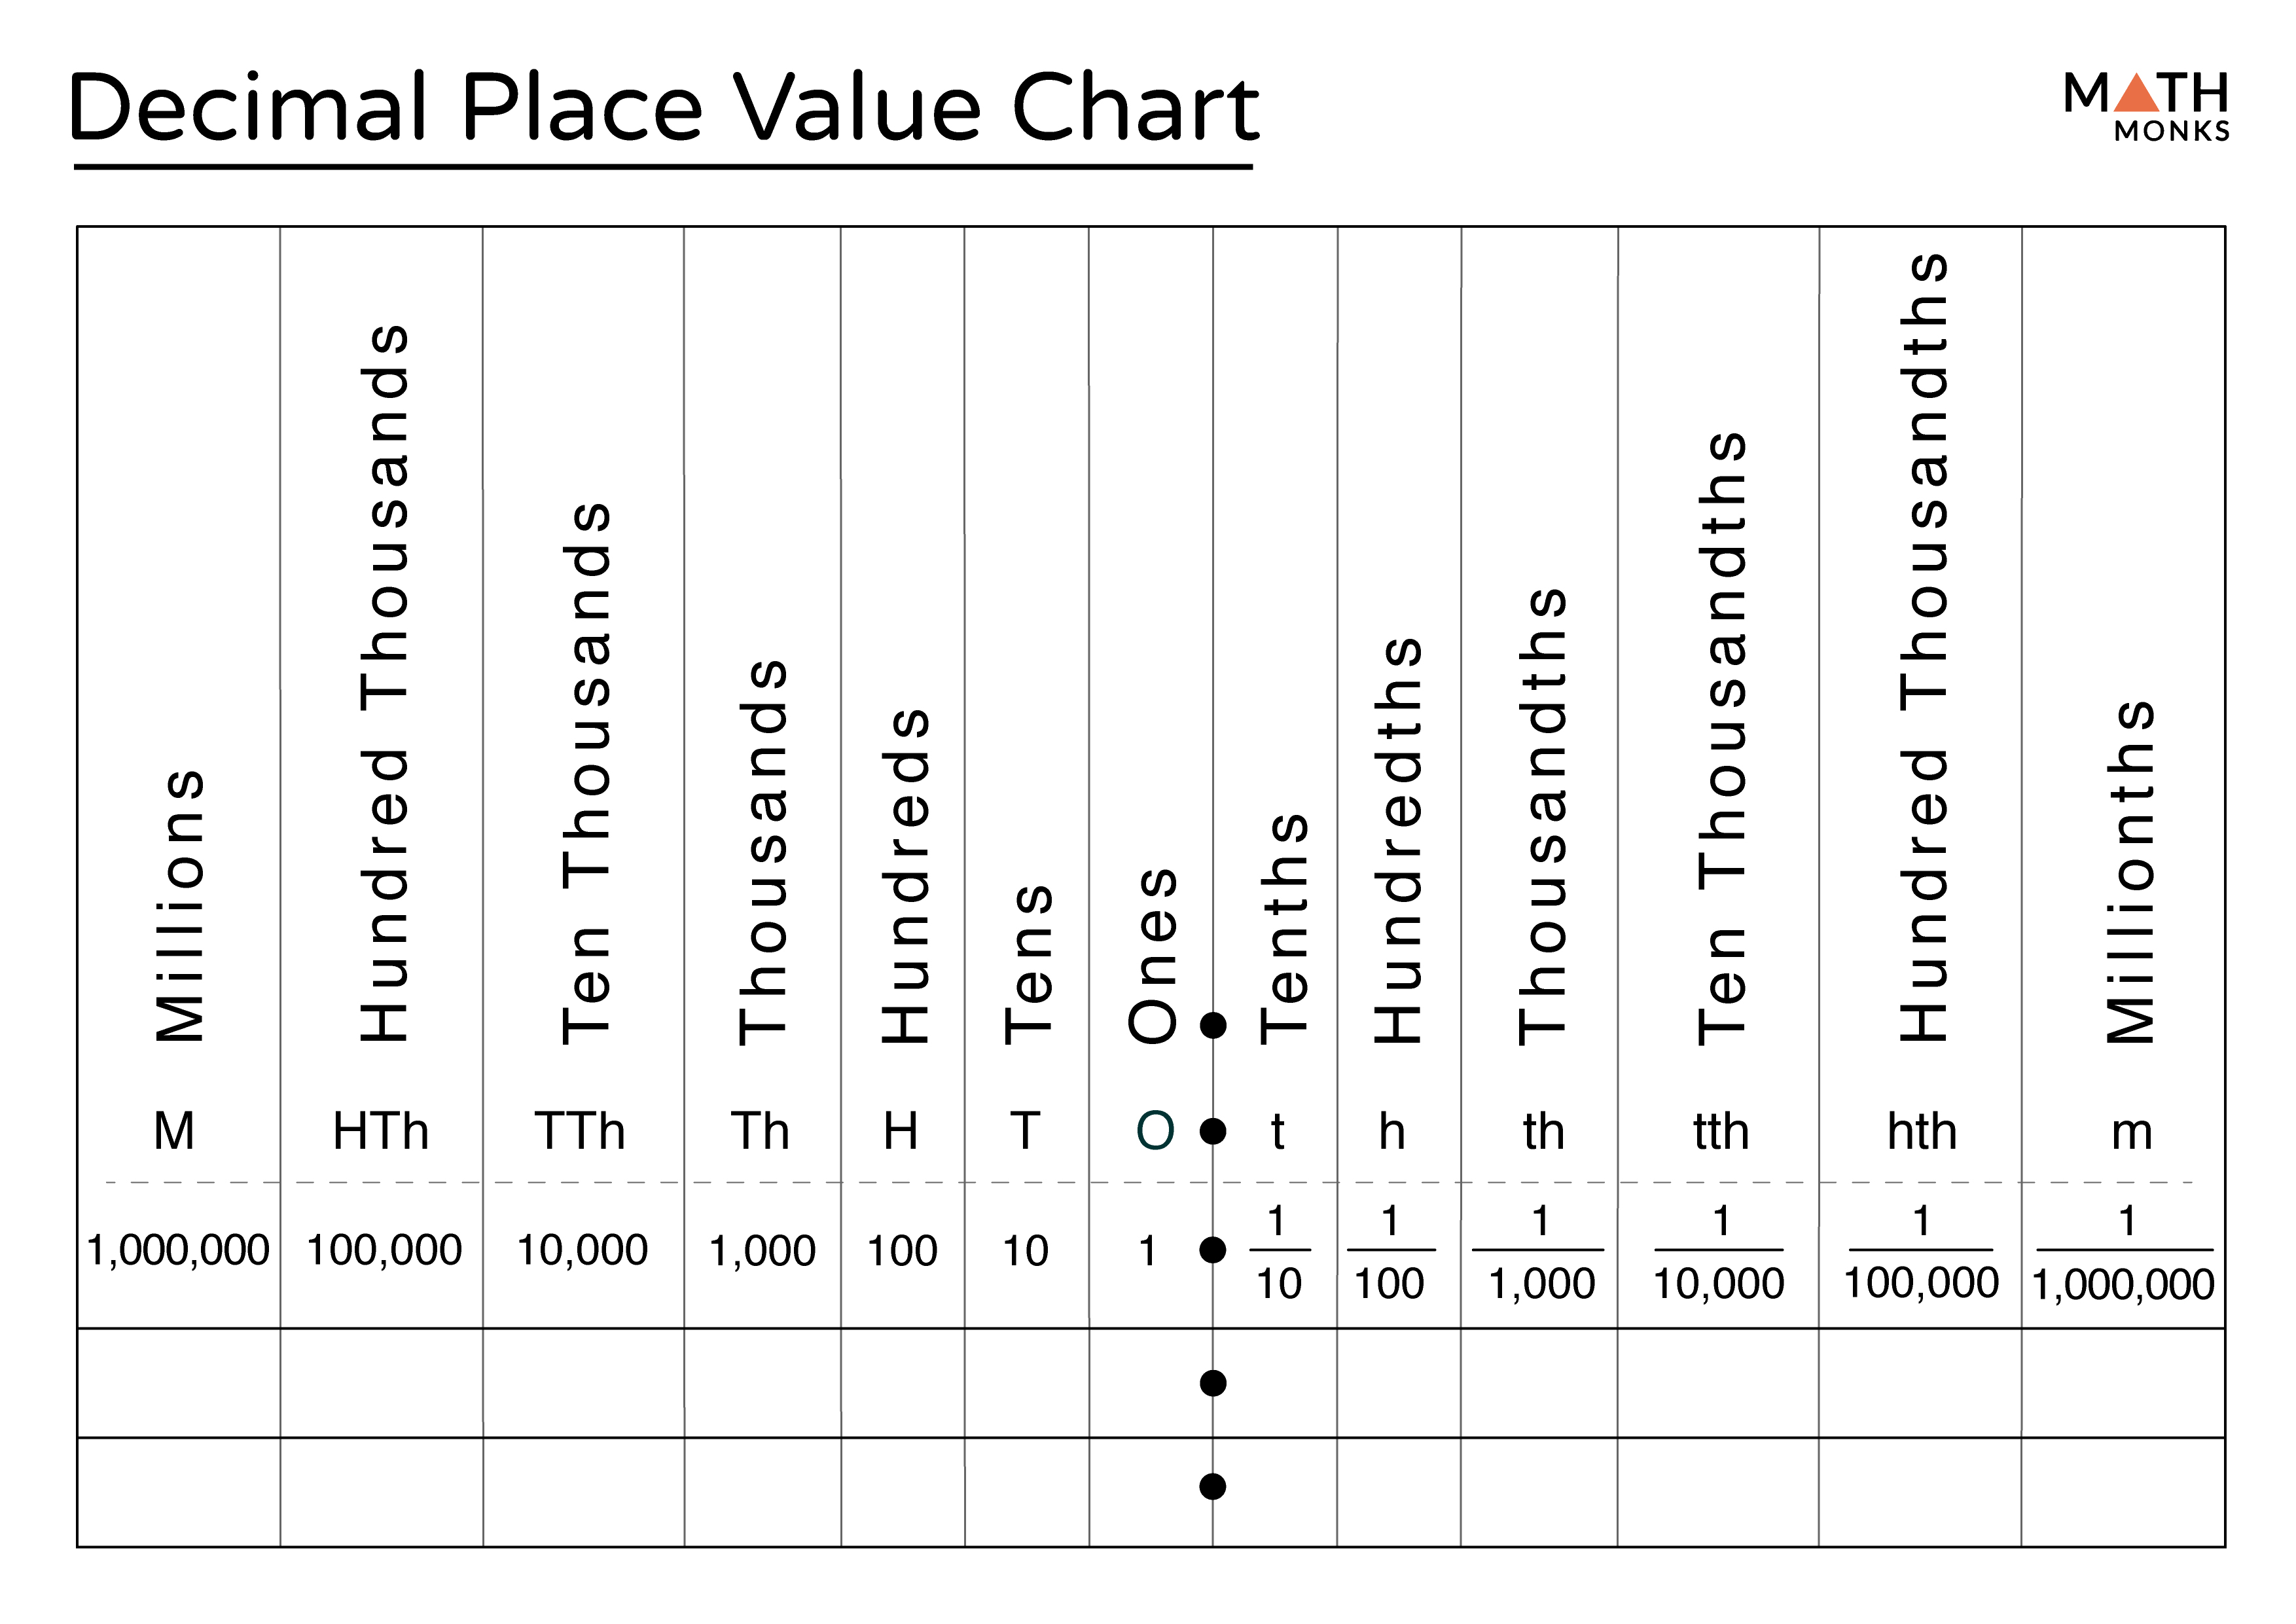 Decimal Place Value Definition Chart Examples